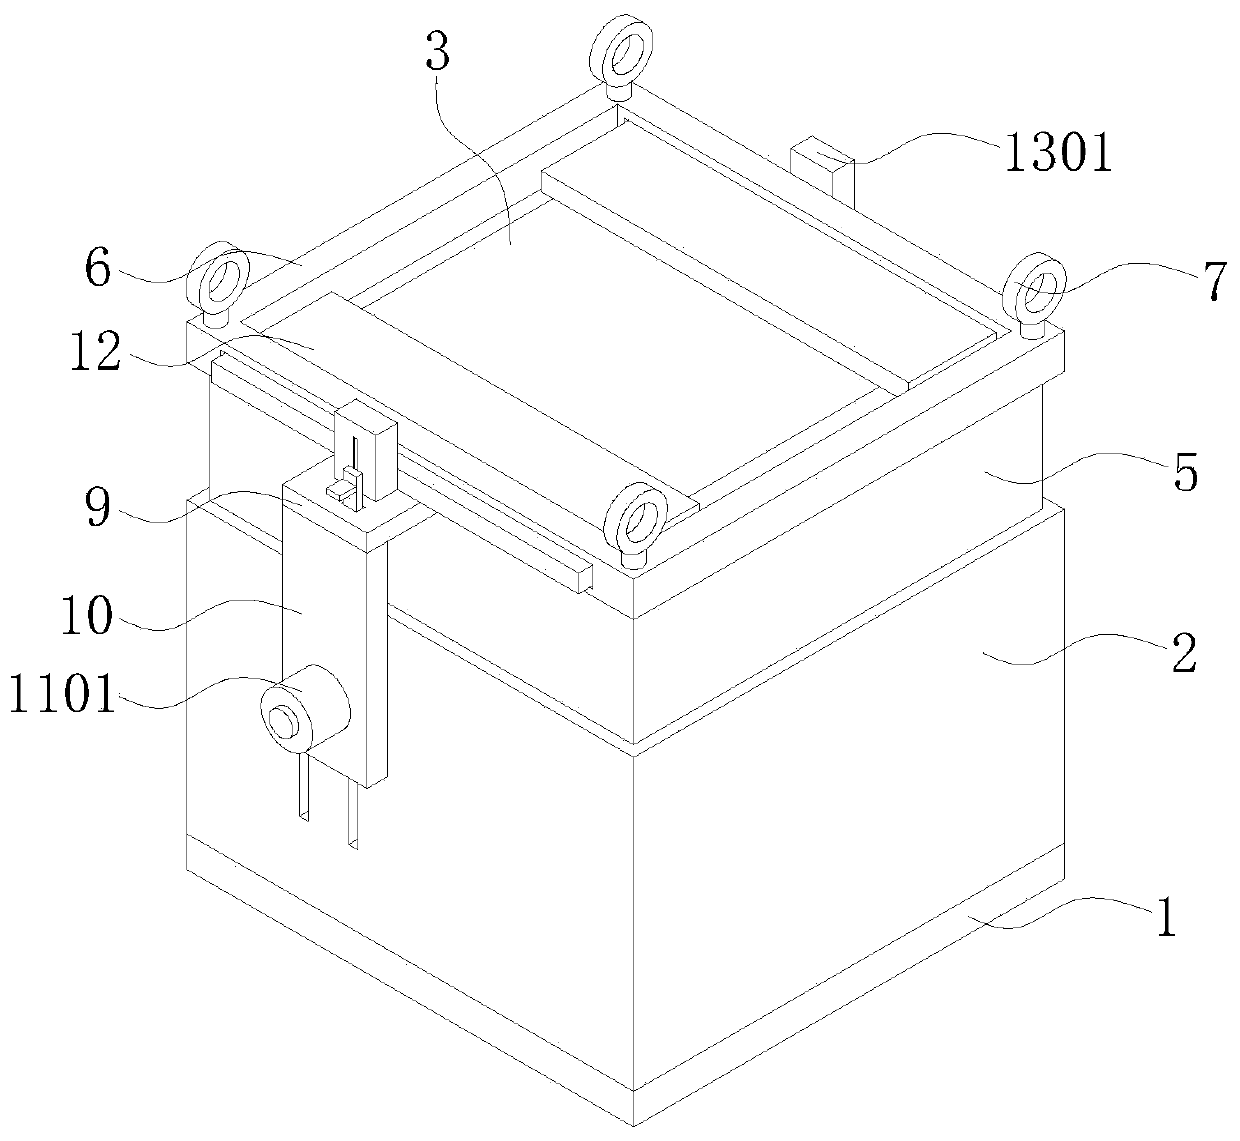 Protective shell of mold and mold mounting method